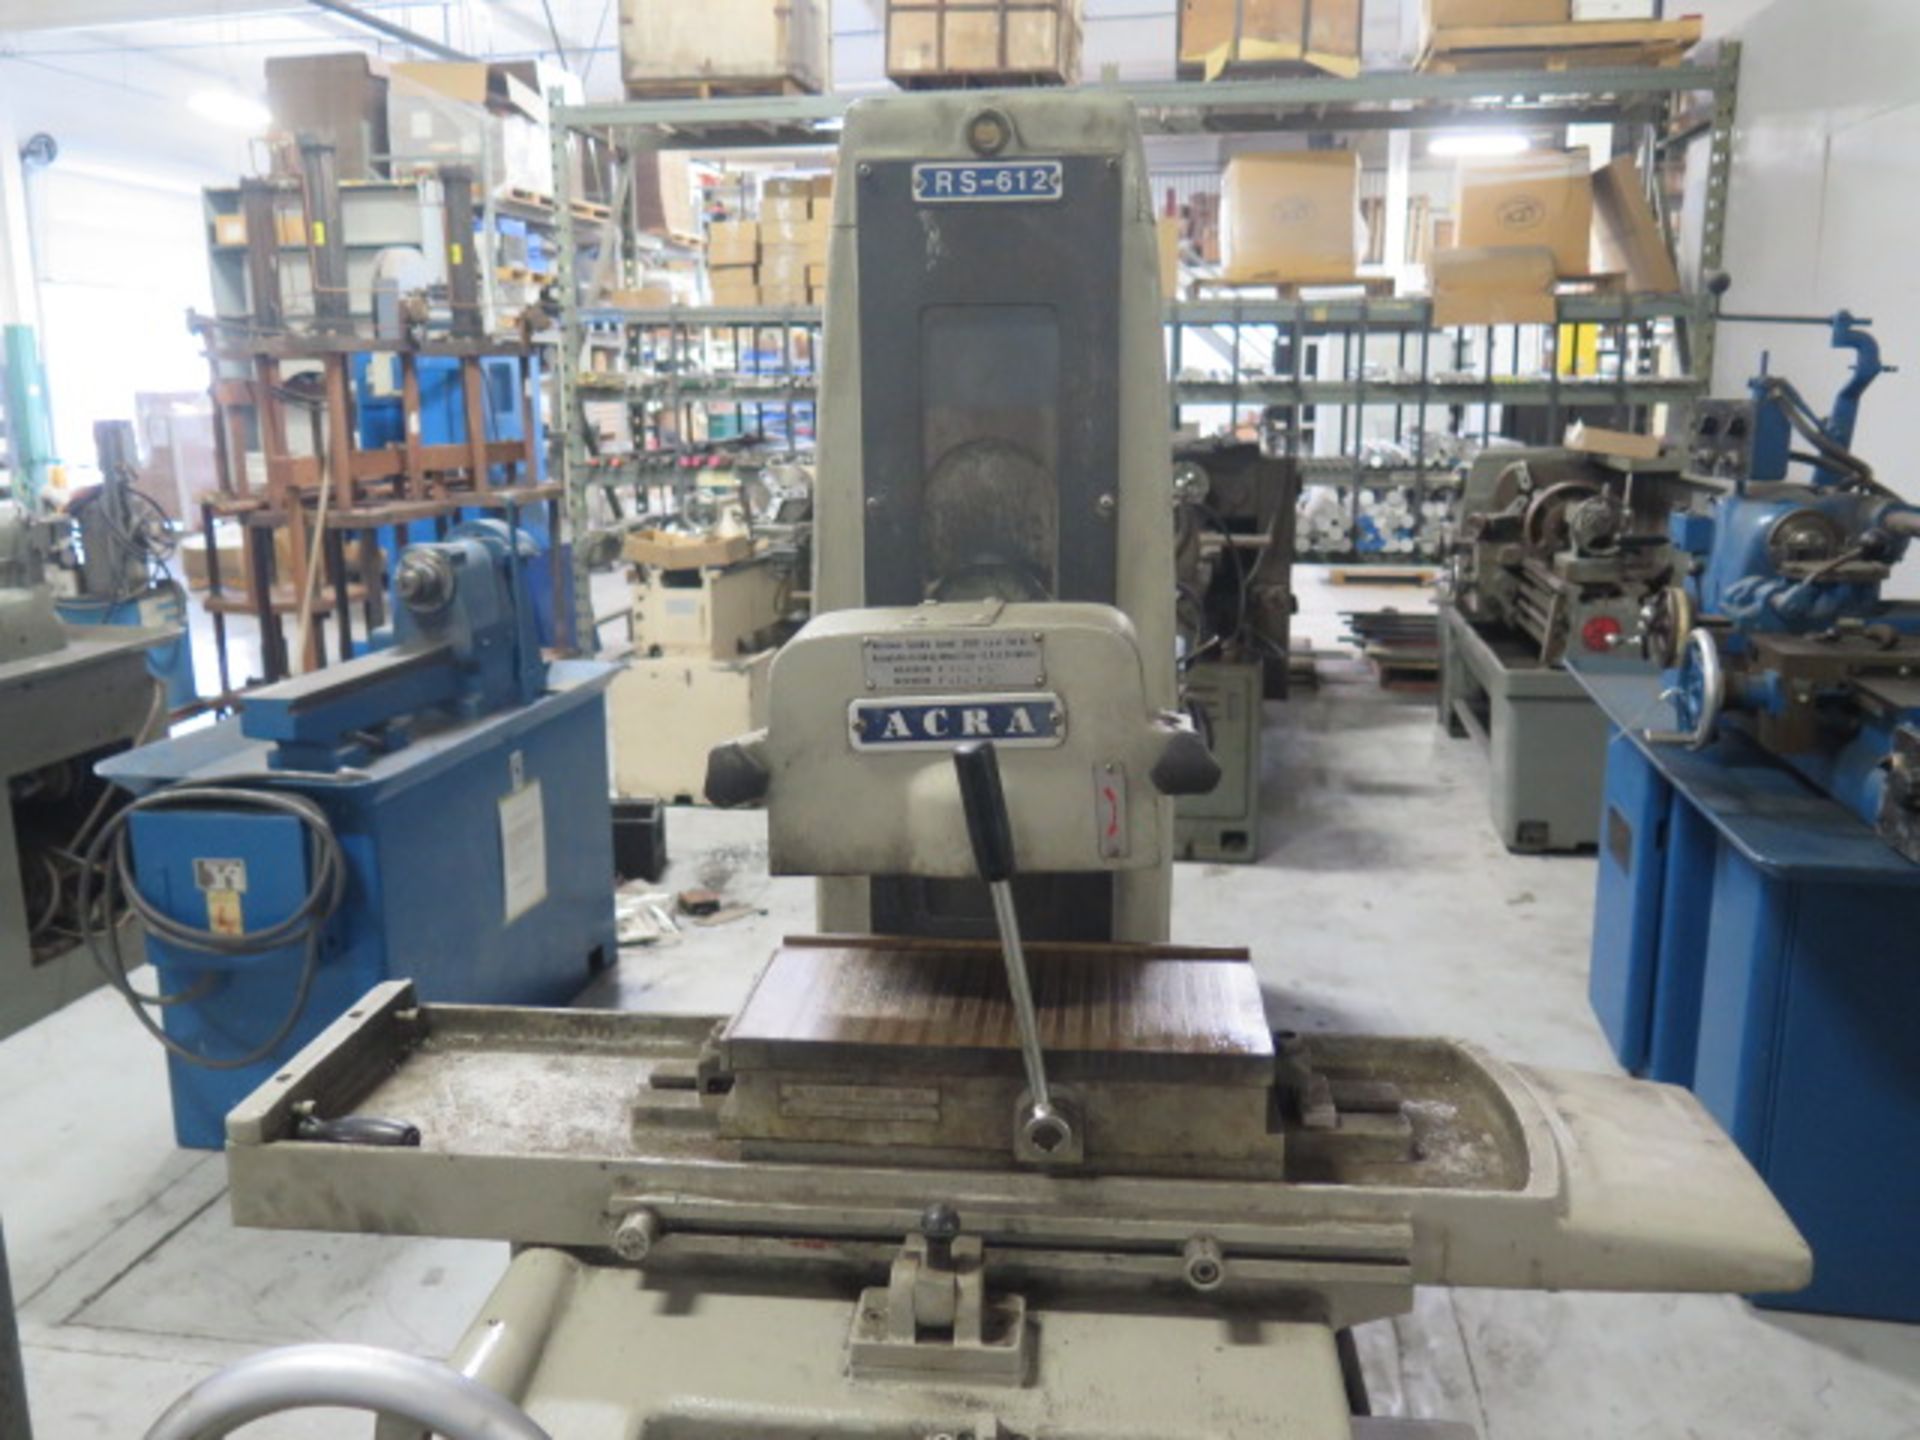 Acra Kong Kuang mdl. RS-612 6” x 12” Surface Grinder s/n 612012 w/ Magnetic Chuck - Image 3 of 7